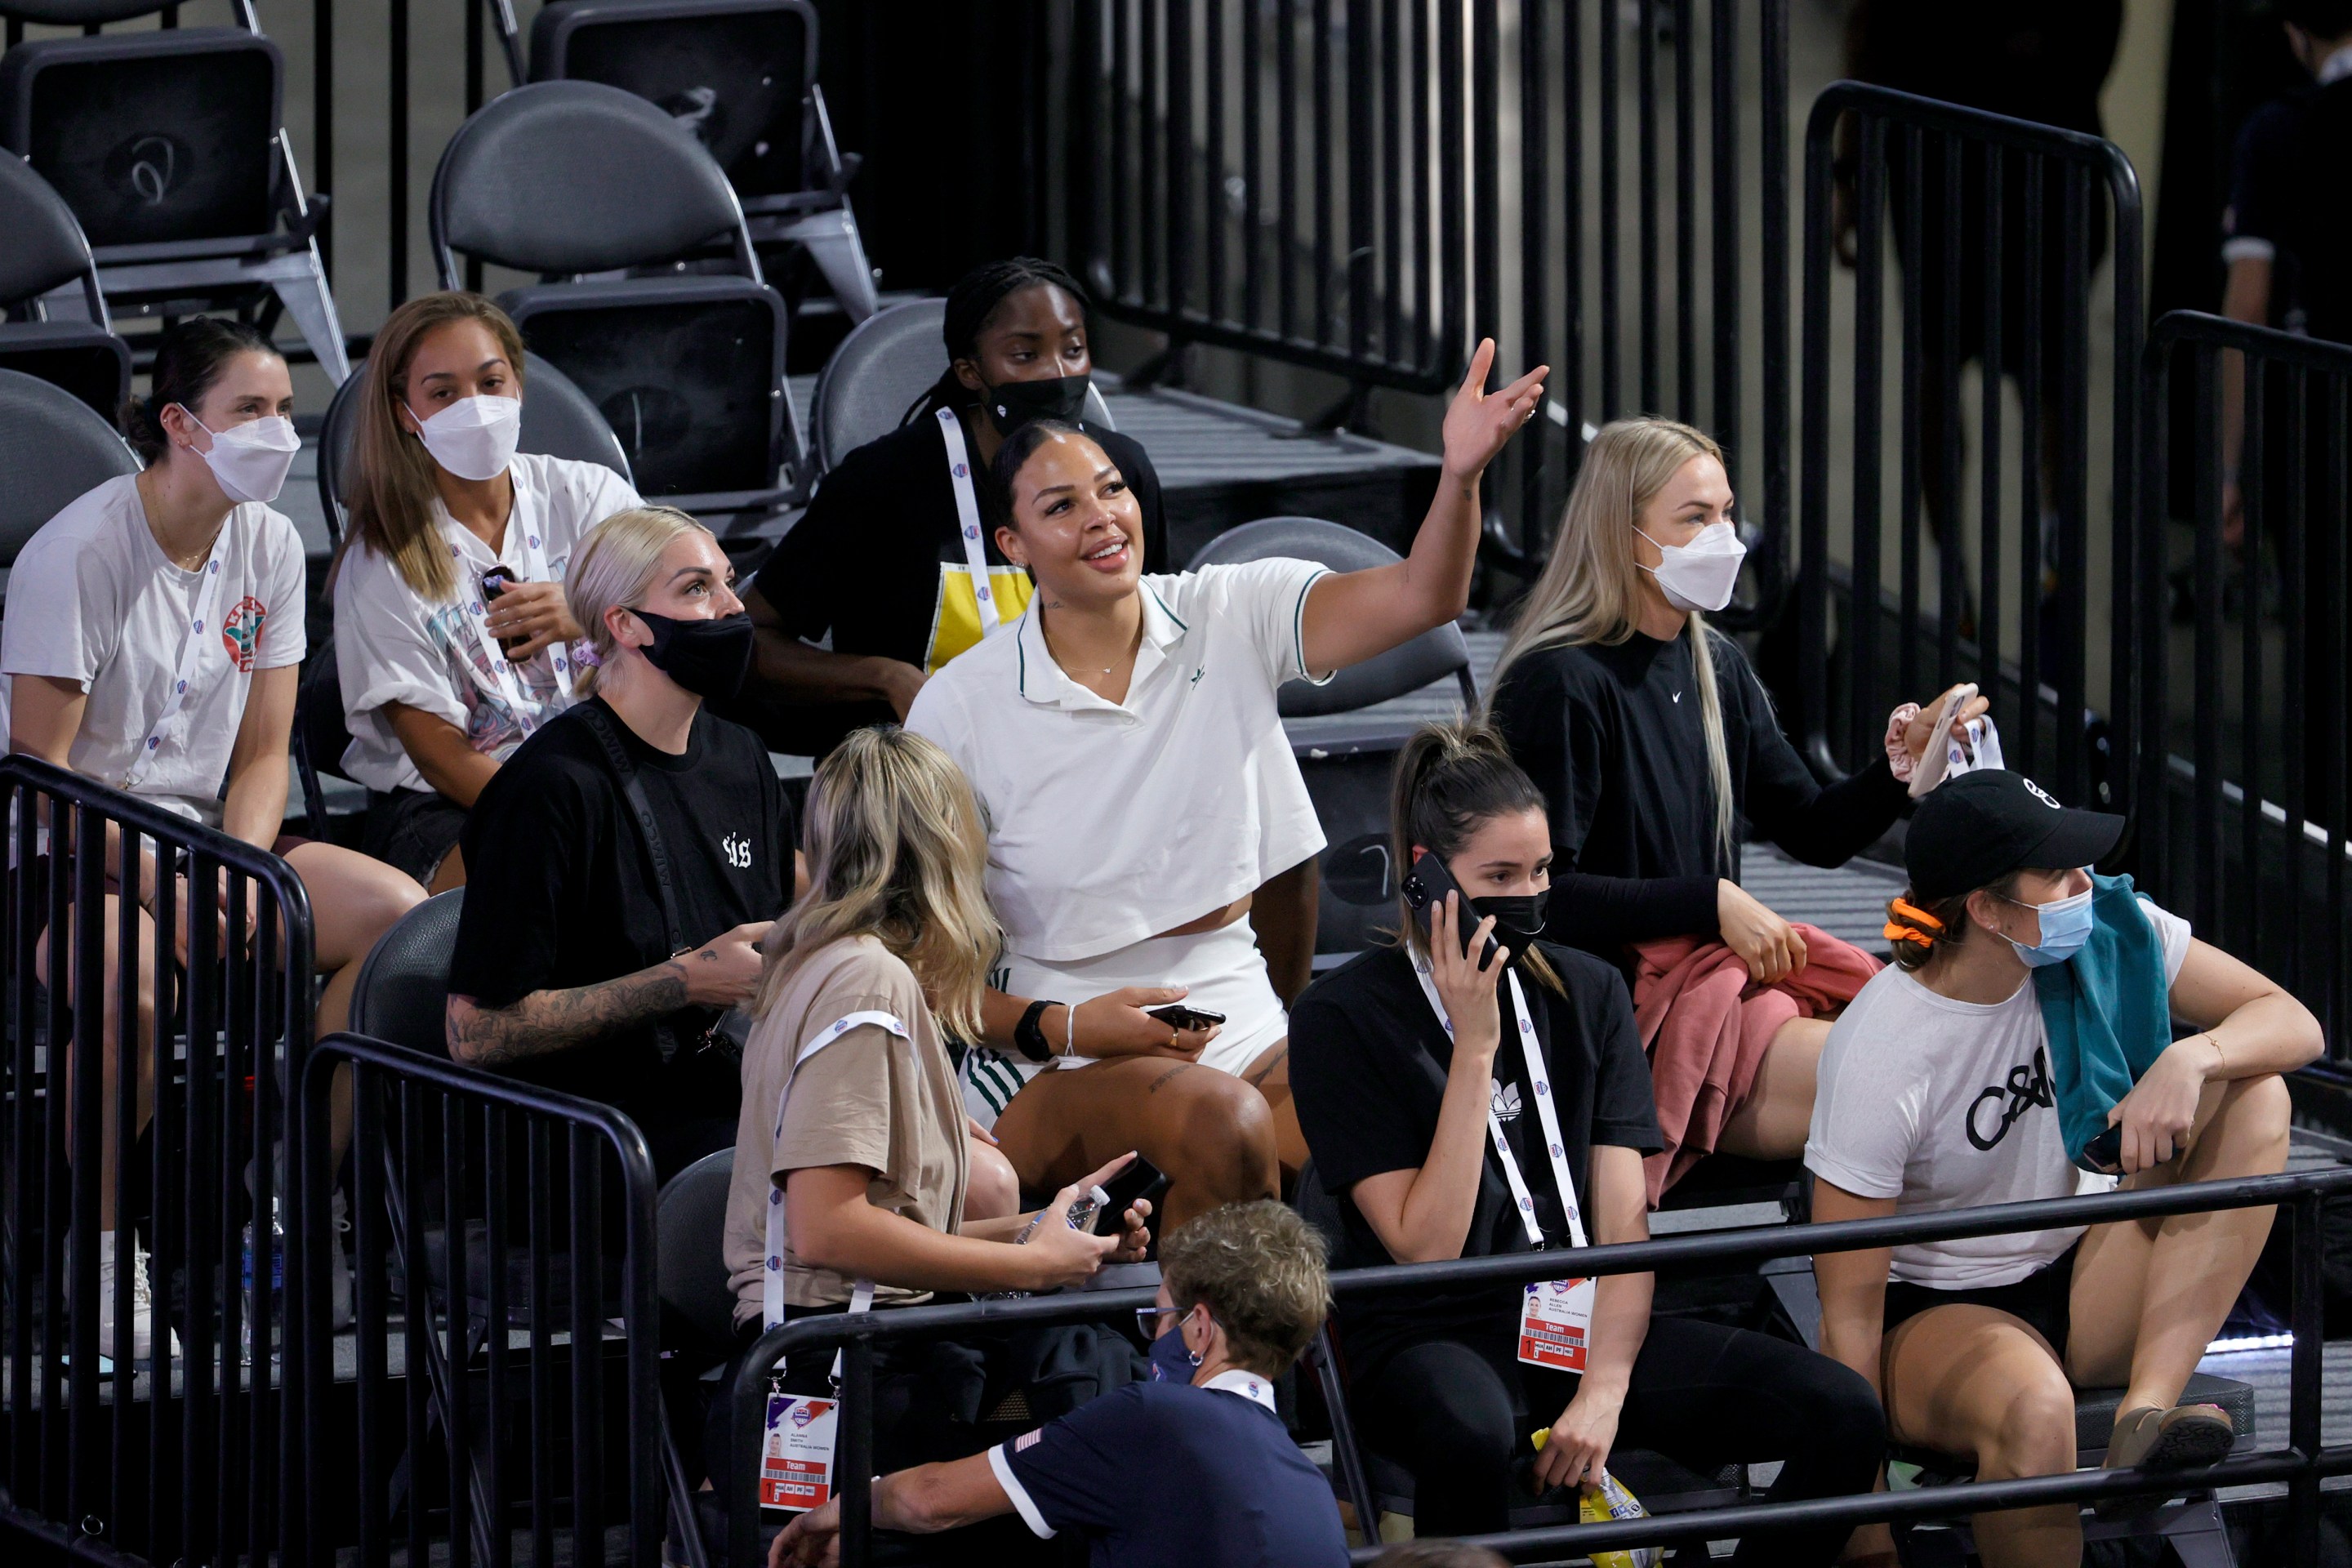 Liz Cambage (C) of the Las Vegas Aces attends an exhibition game between Nigeria and the United States at Michelob ULTRA Arena ahead of the Tokyo Olympic Games on July 10, 2021 in Las Vegas, Nevada.